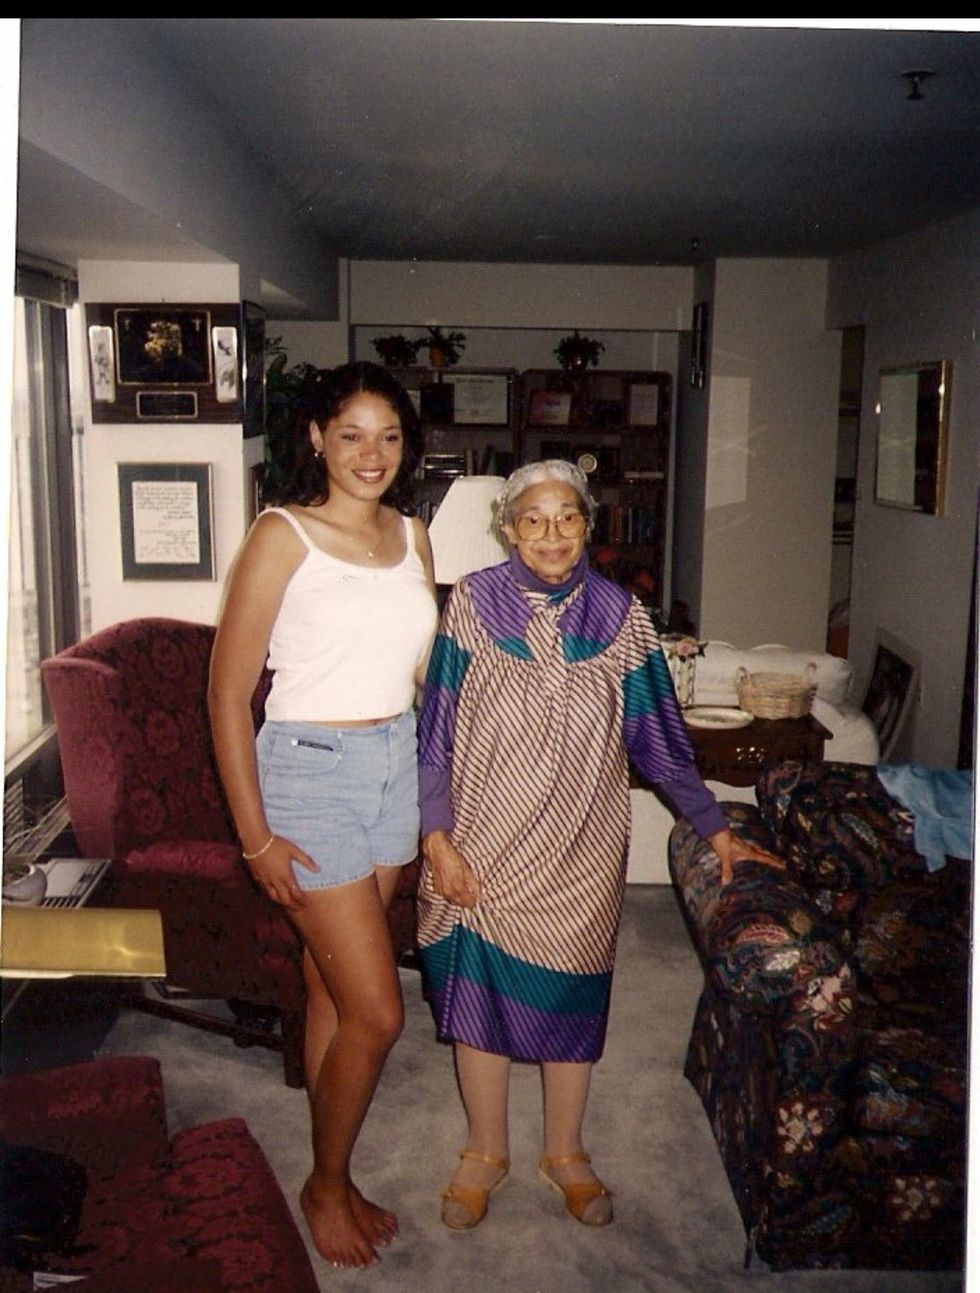 urana mccauley as a teenager with her aunt rosa parks